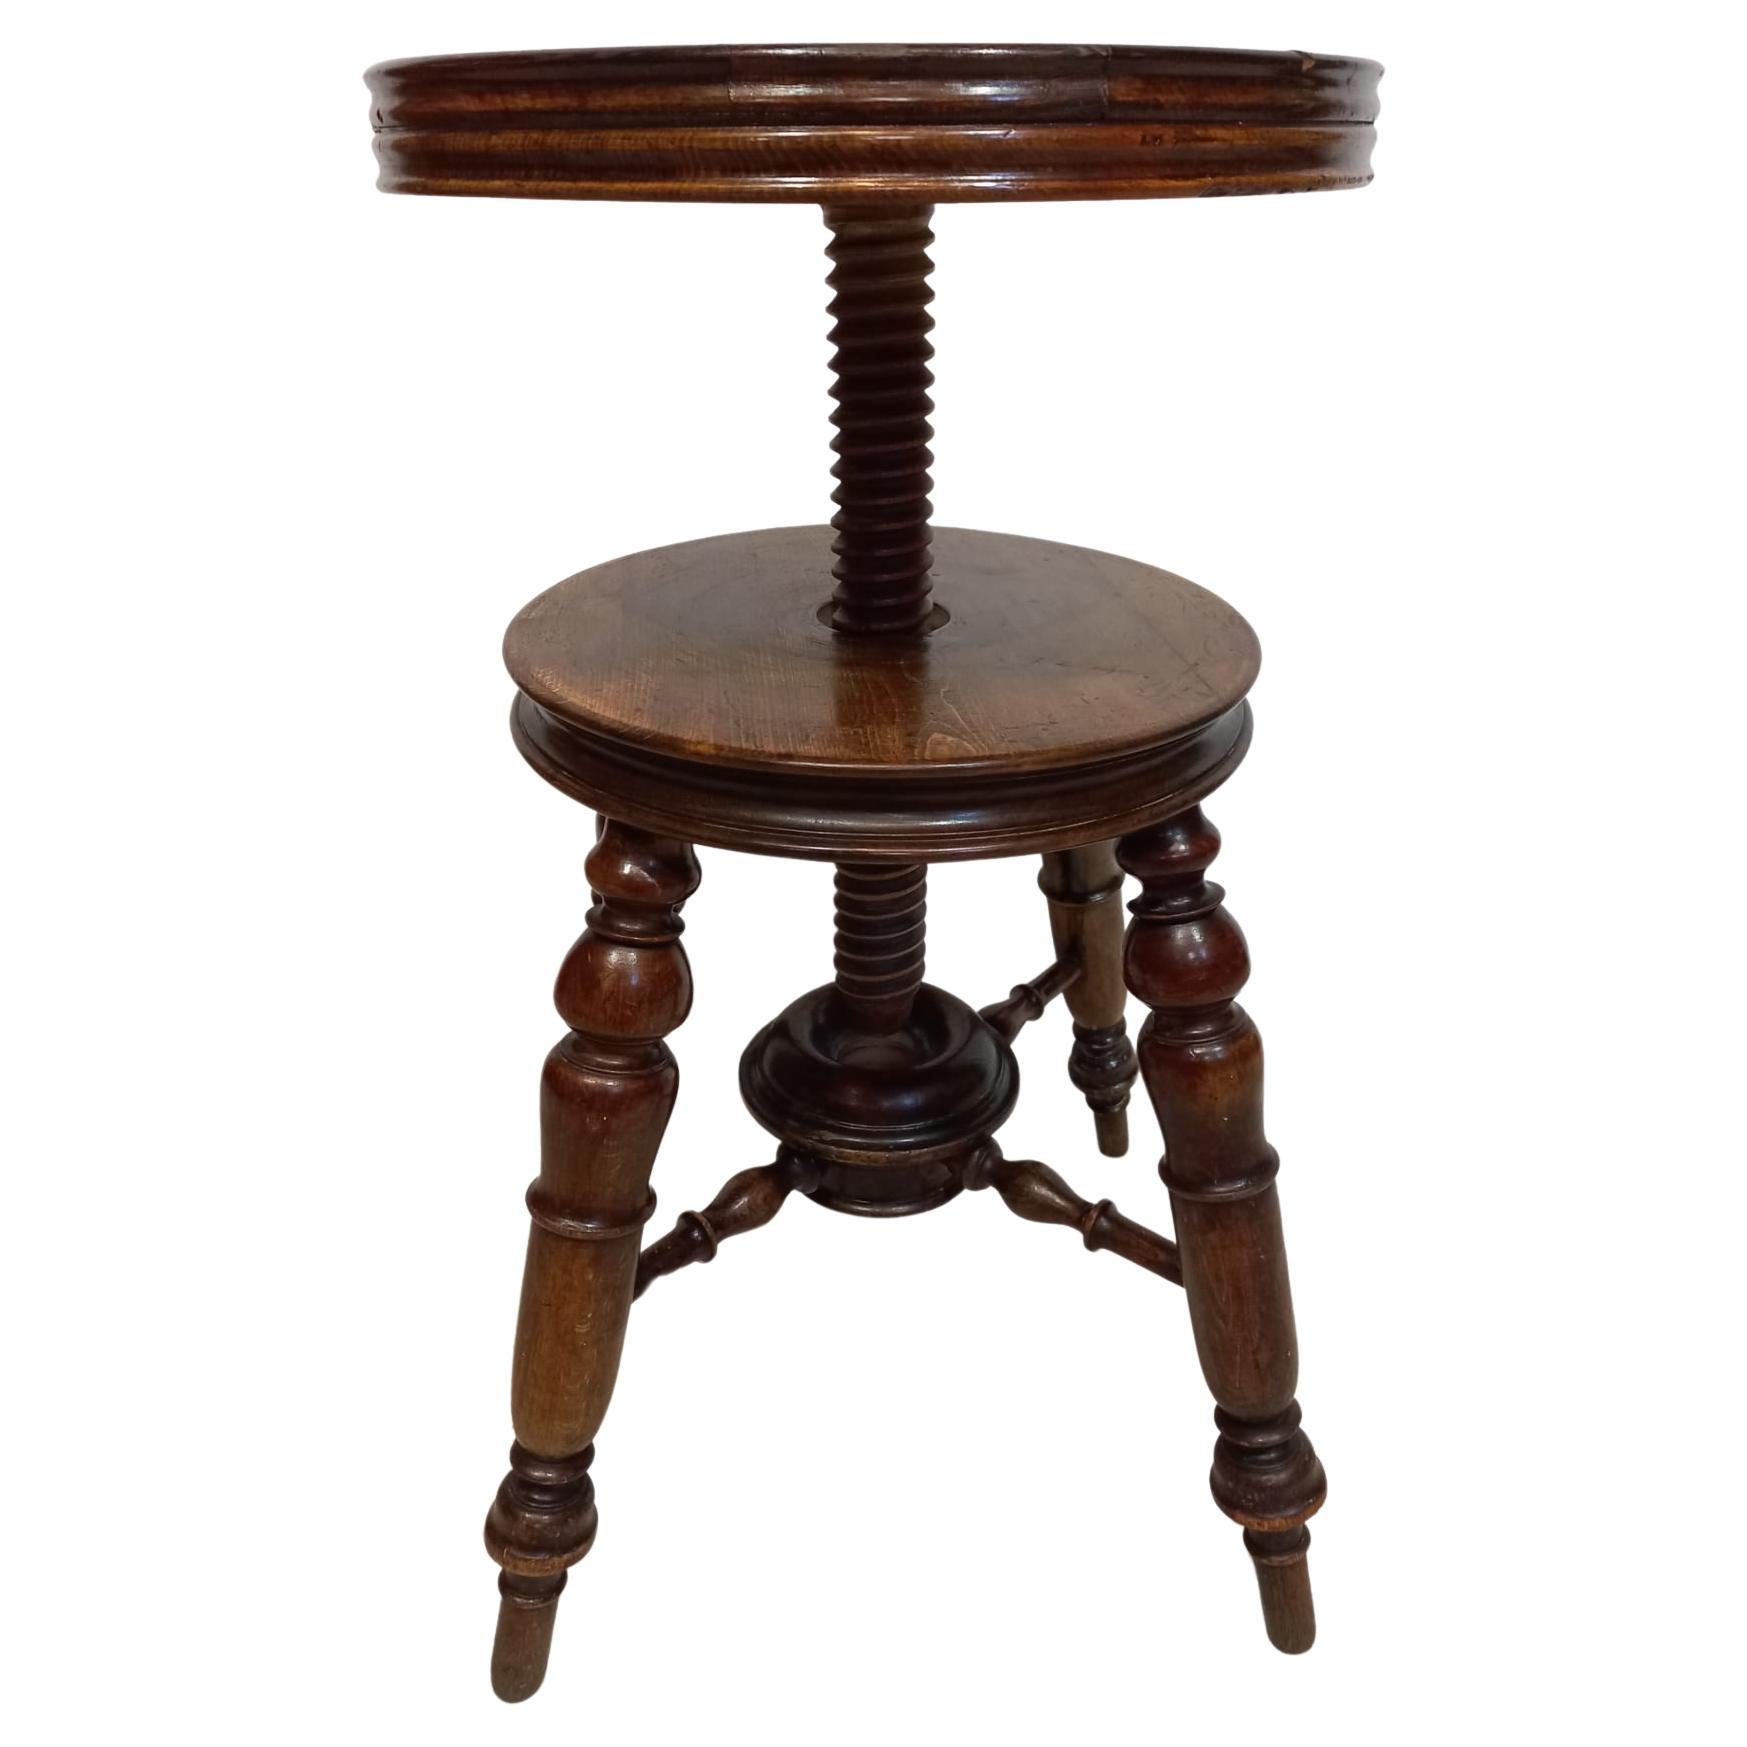 1880s, piano stool, made of beech, stained, good condition.

